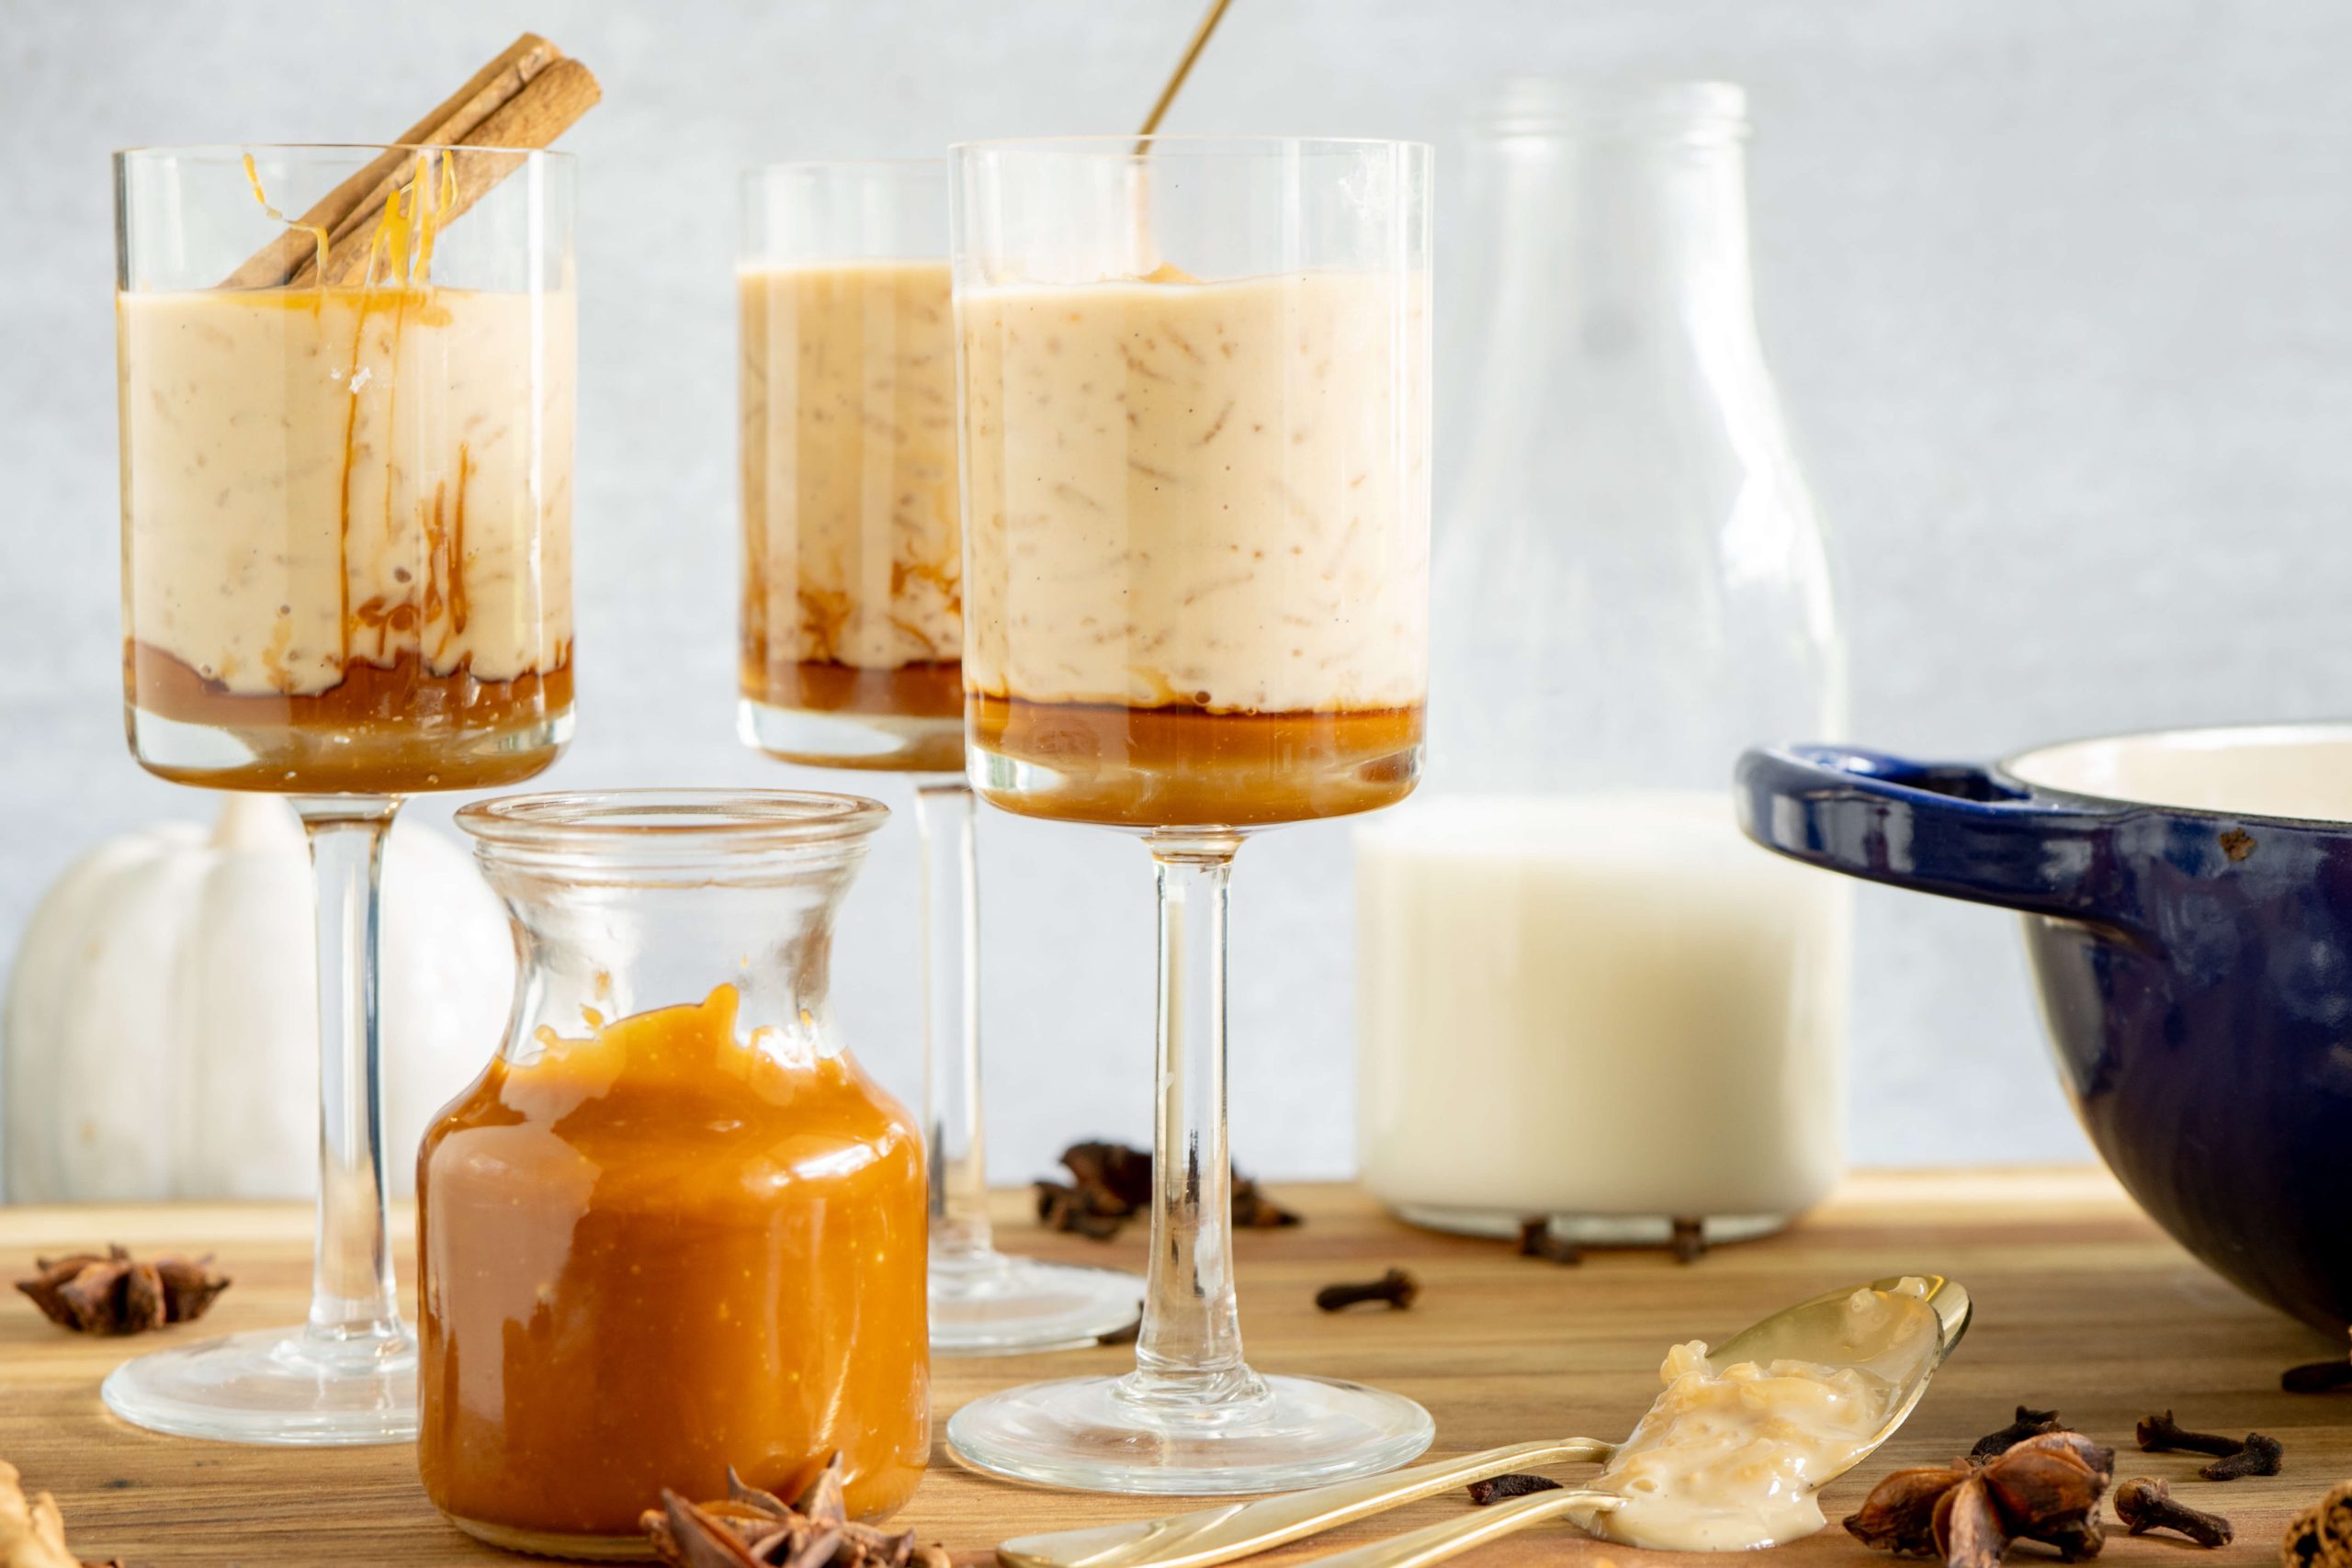 caramel sauce and rice pudding served in tall glasses